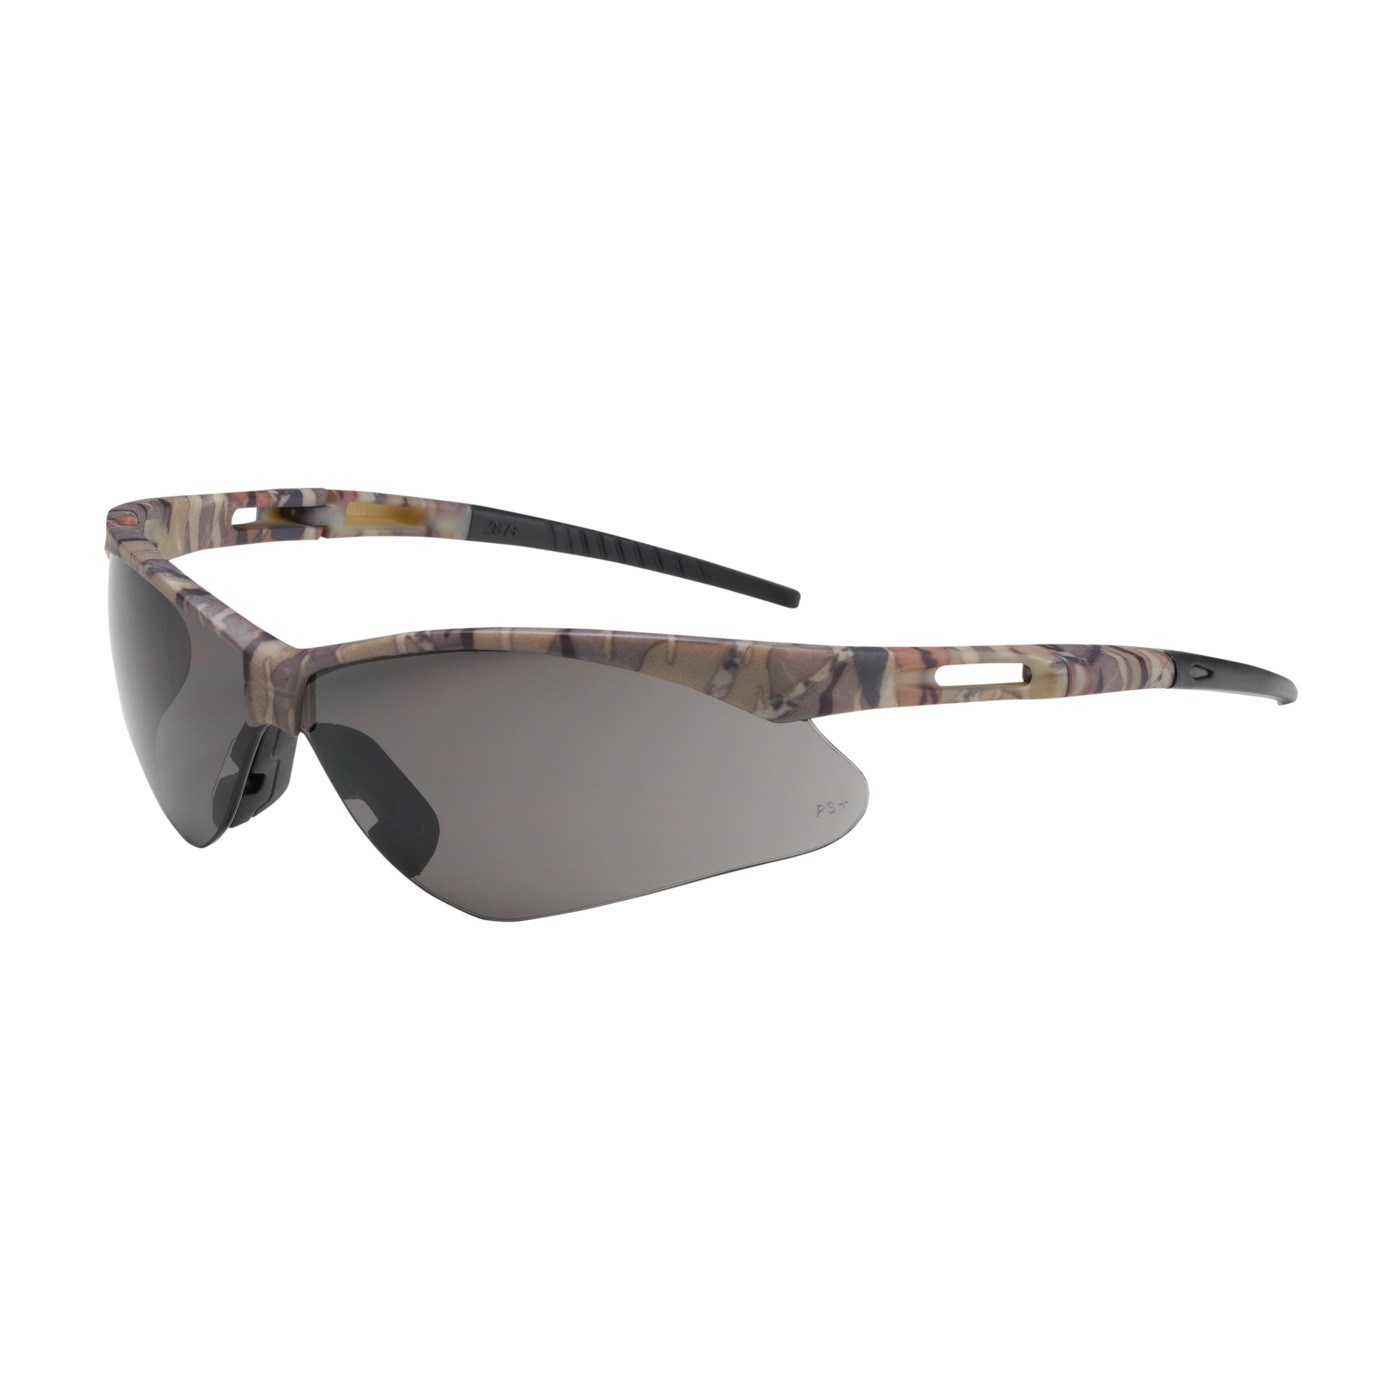 Anser™ Semi-Rimless Safety Glasses with Camouflage Frame, Gray Lens and Anti-Scratch Coating  (#250-AN-10123)